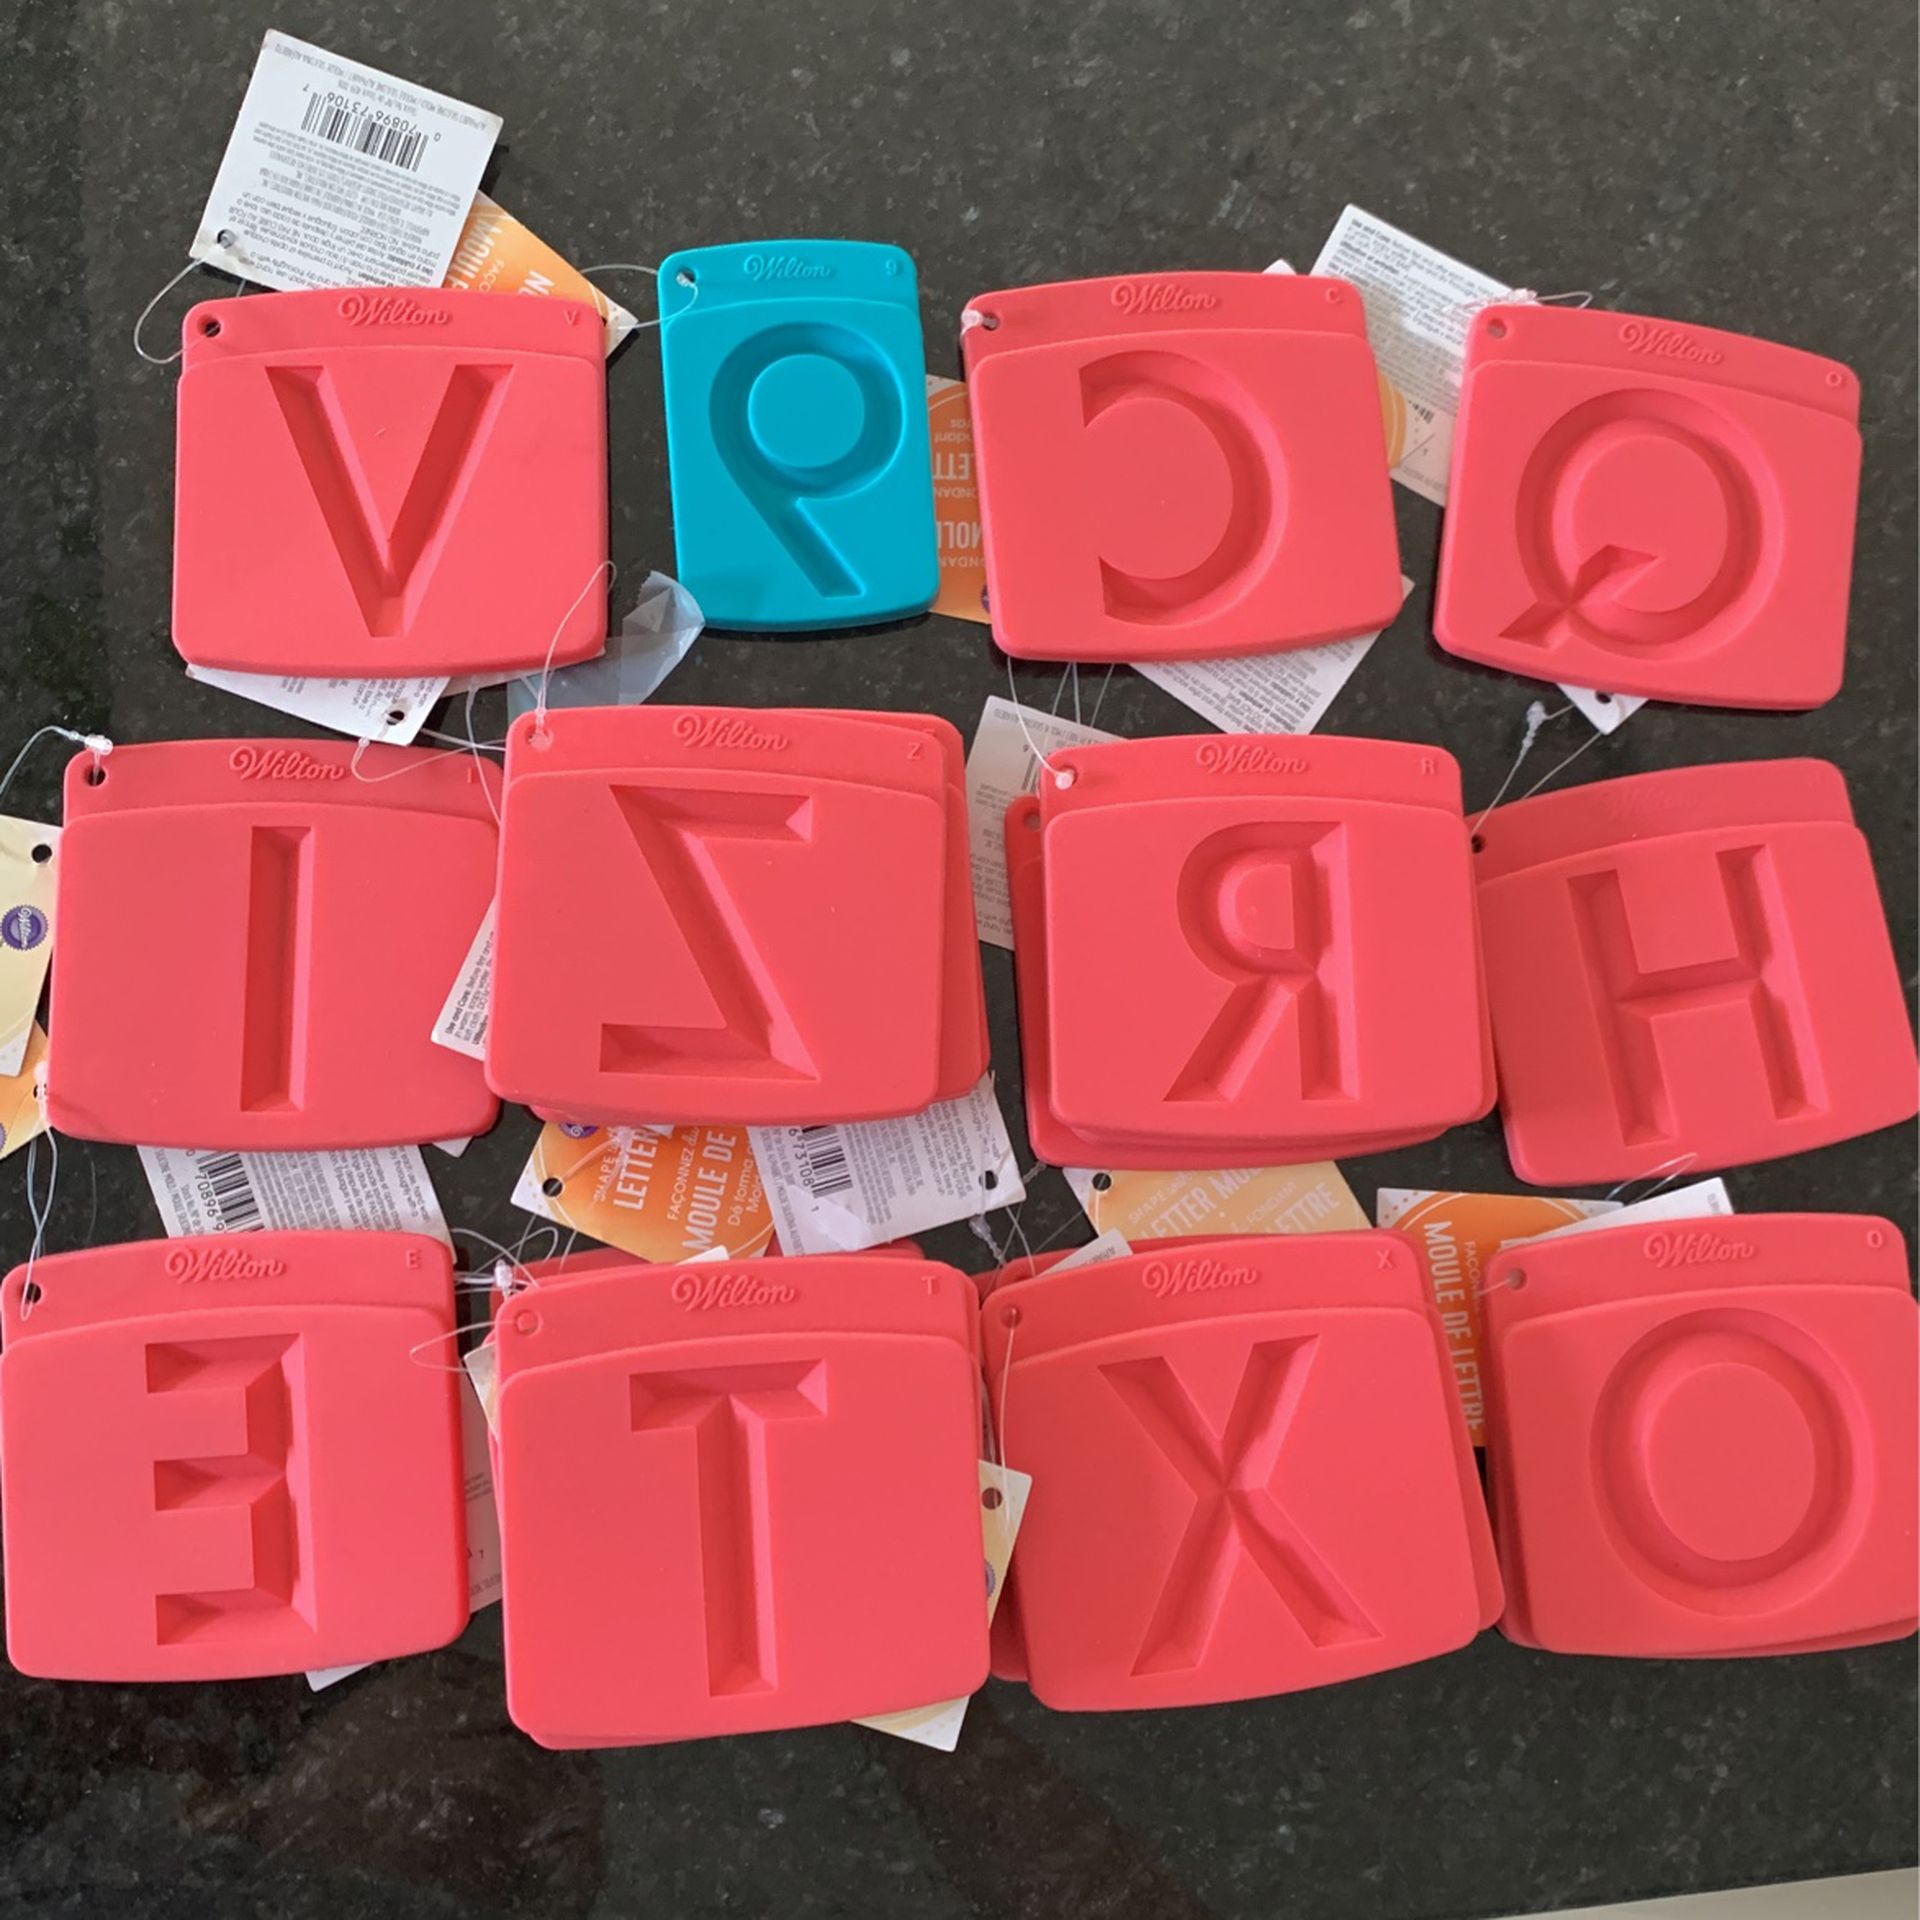 Letter And Number Molds For Crafts